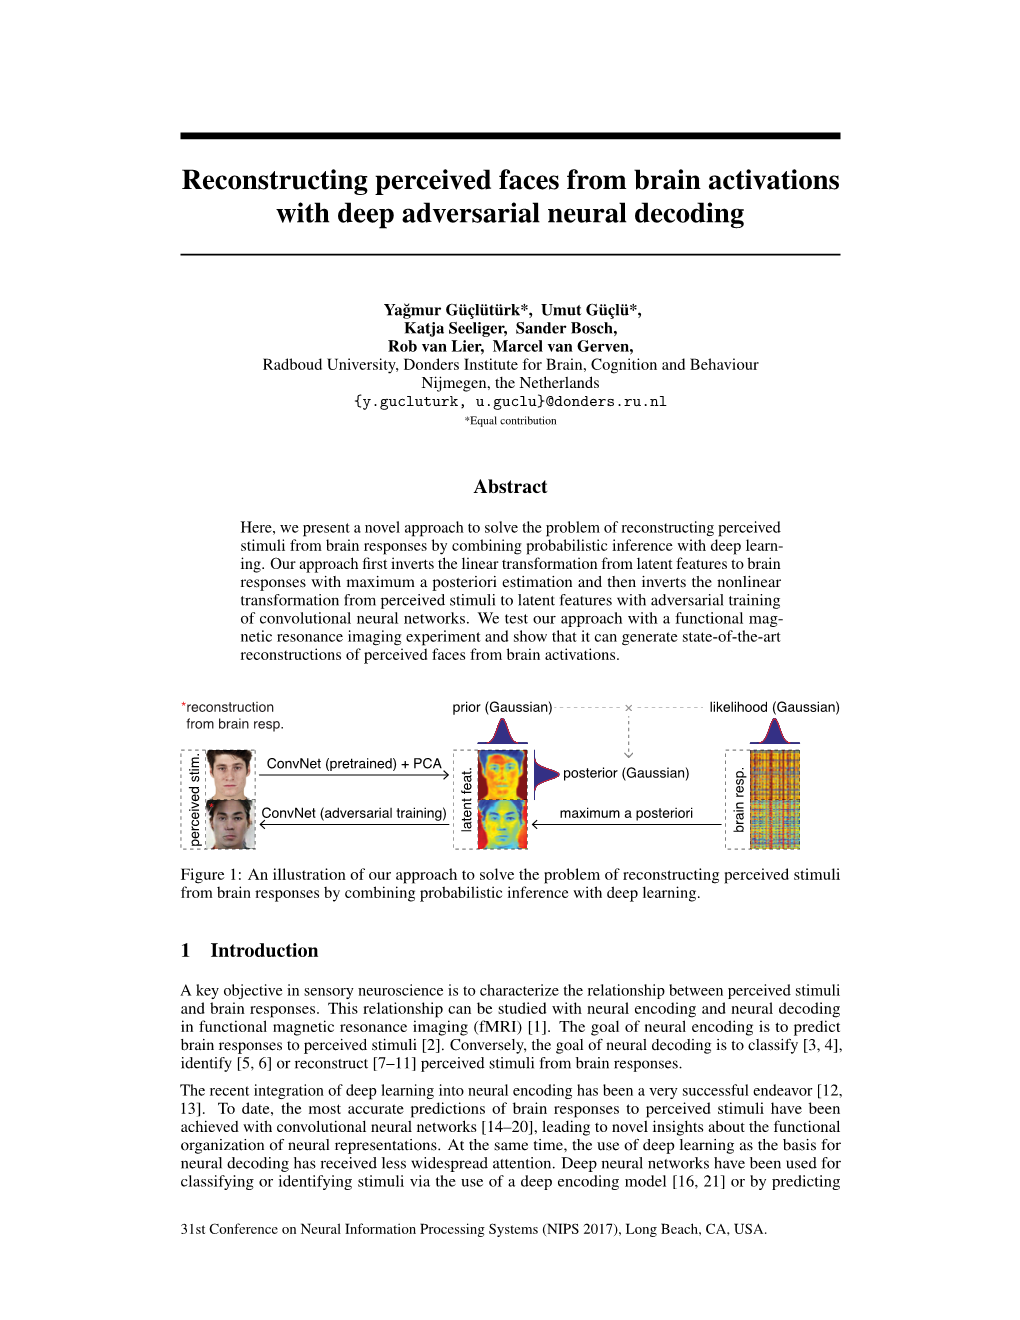 Reconstructing Perceived Faces from Brain Activations with Deep Adversarial Neural Decoding